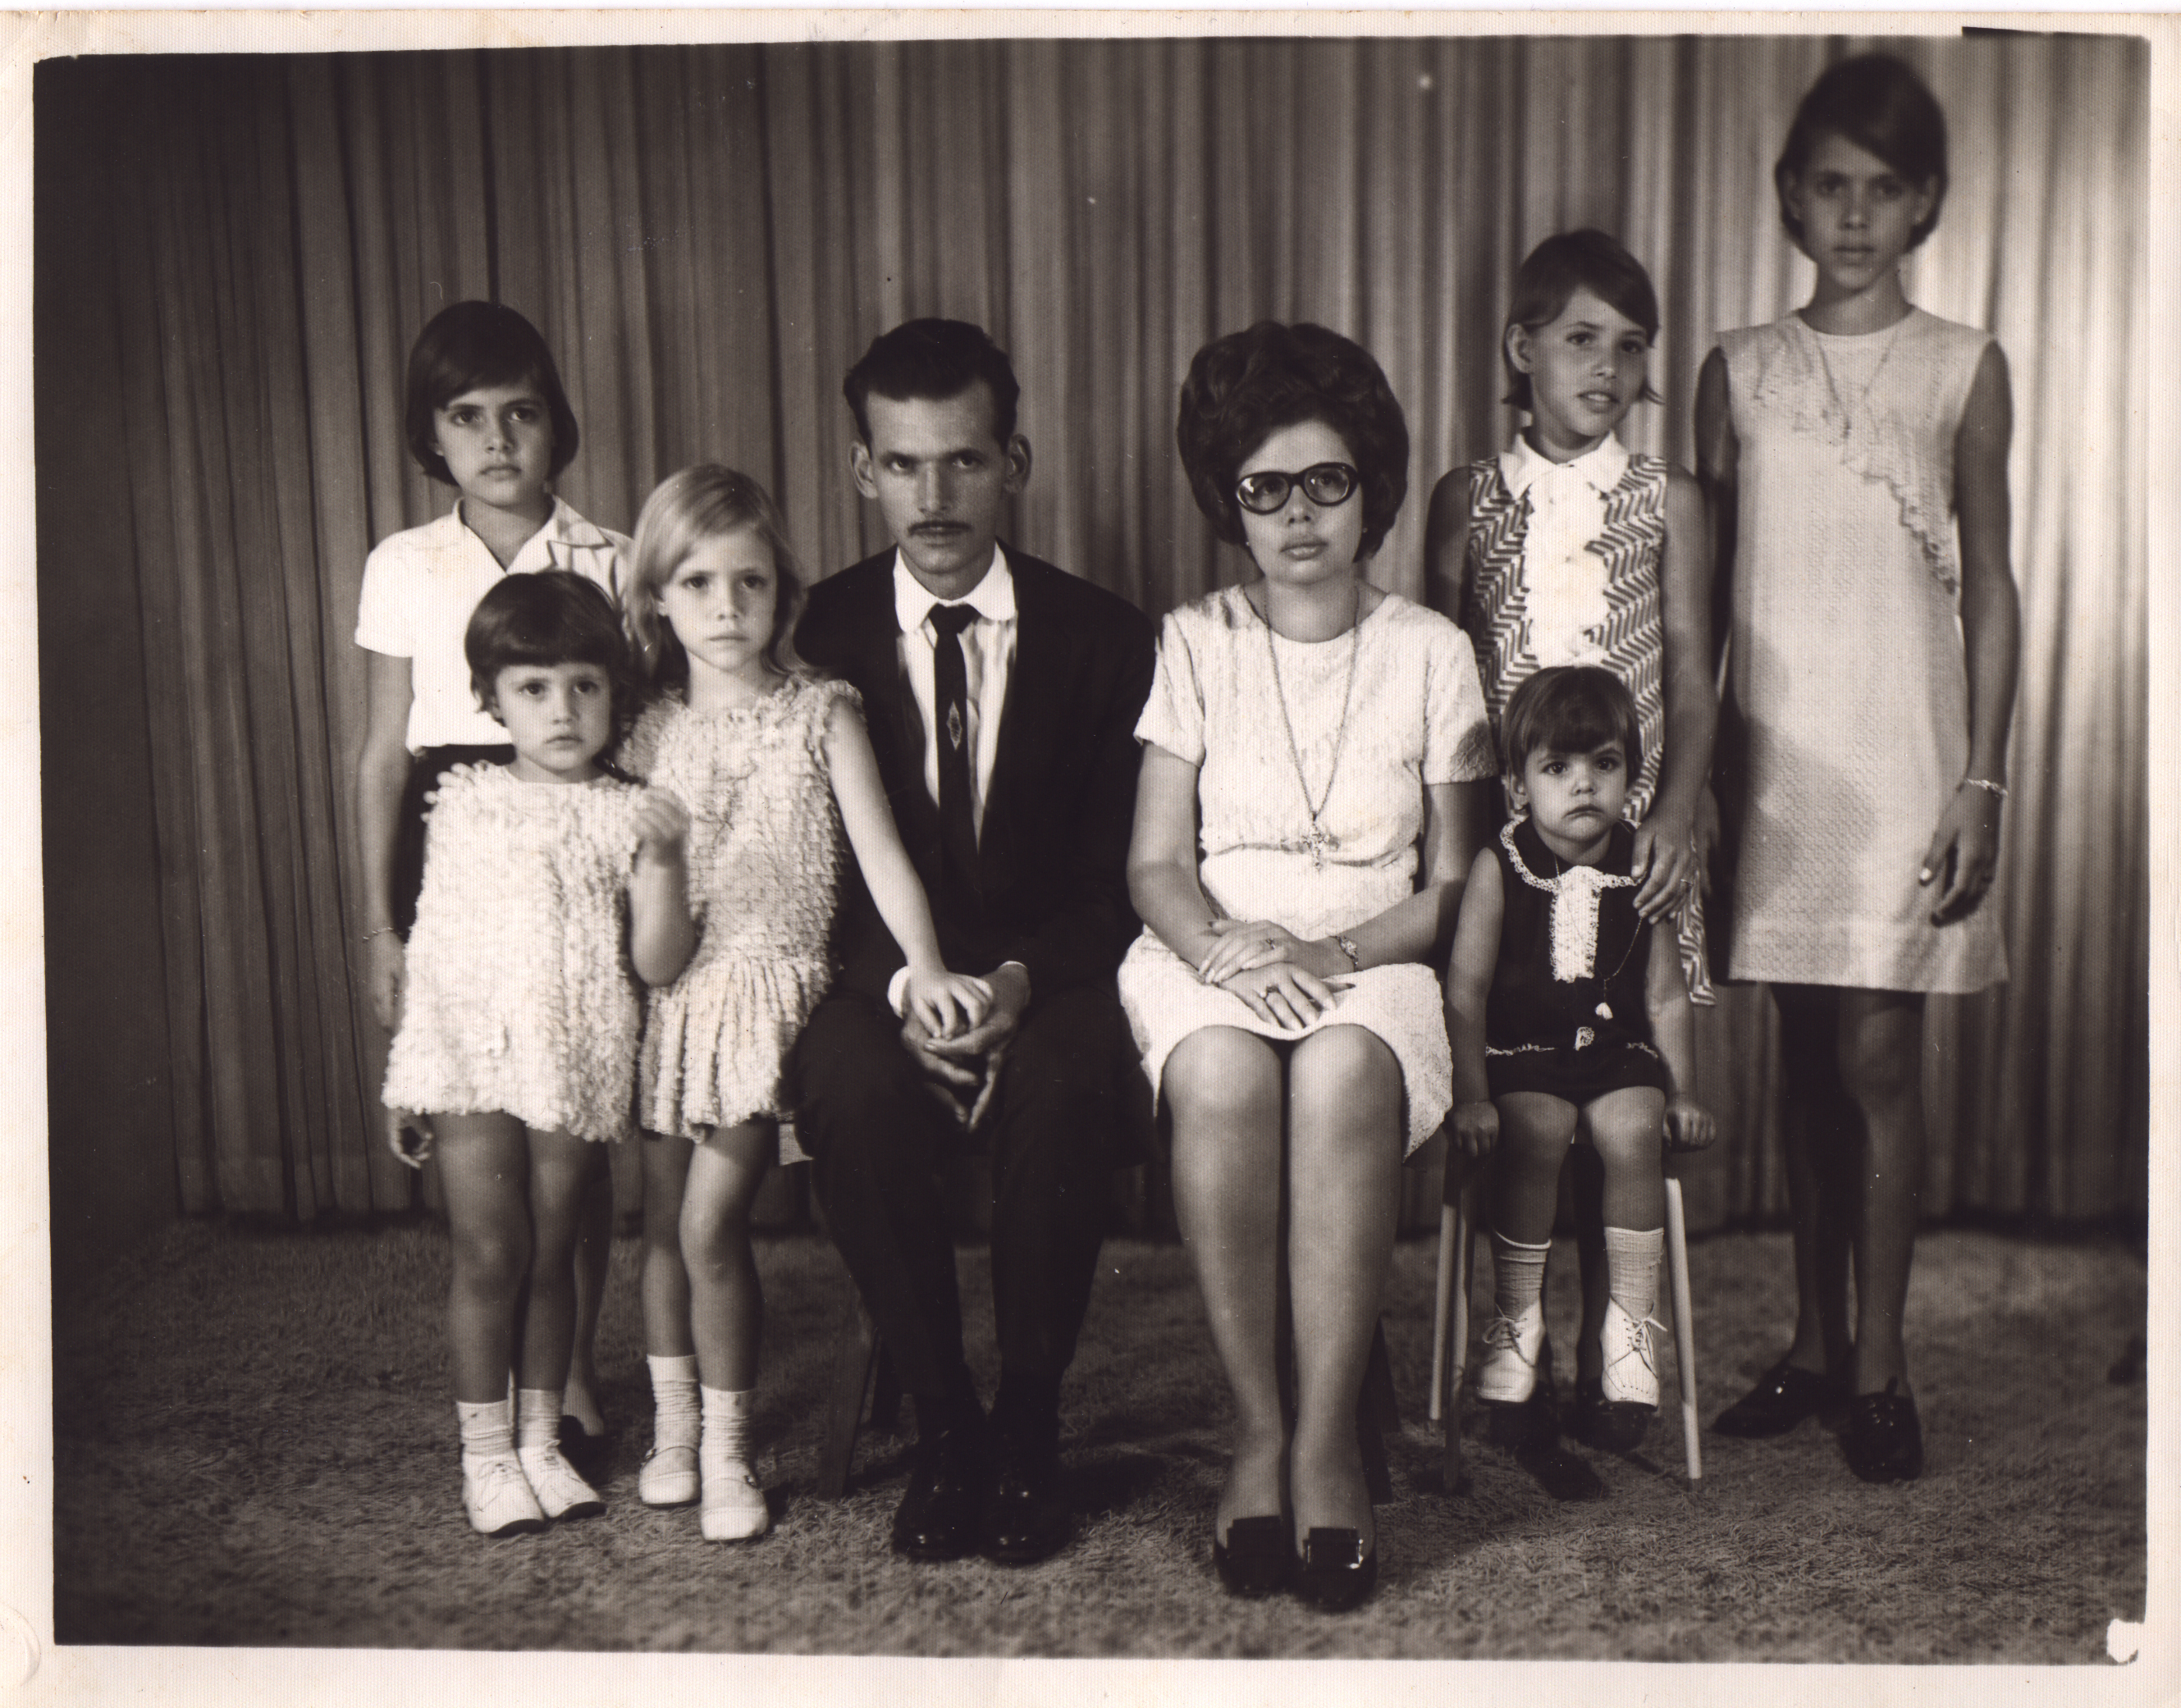 My parents Alcides and Tereza, and my five sisters. From left: Jacy, Luisa, Valeria, Yara and Maria Tereza. I'm the youngest, sitting next to Mom on the right.